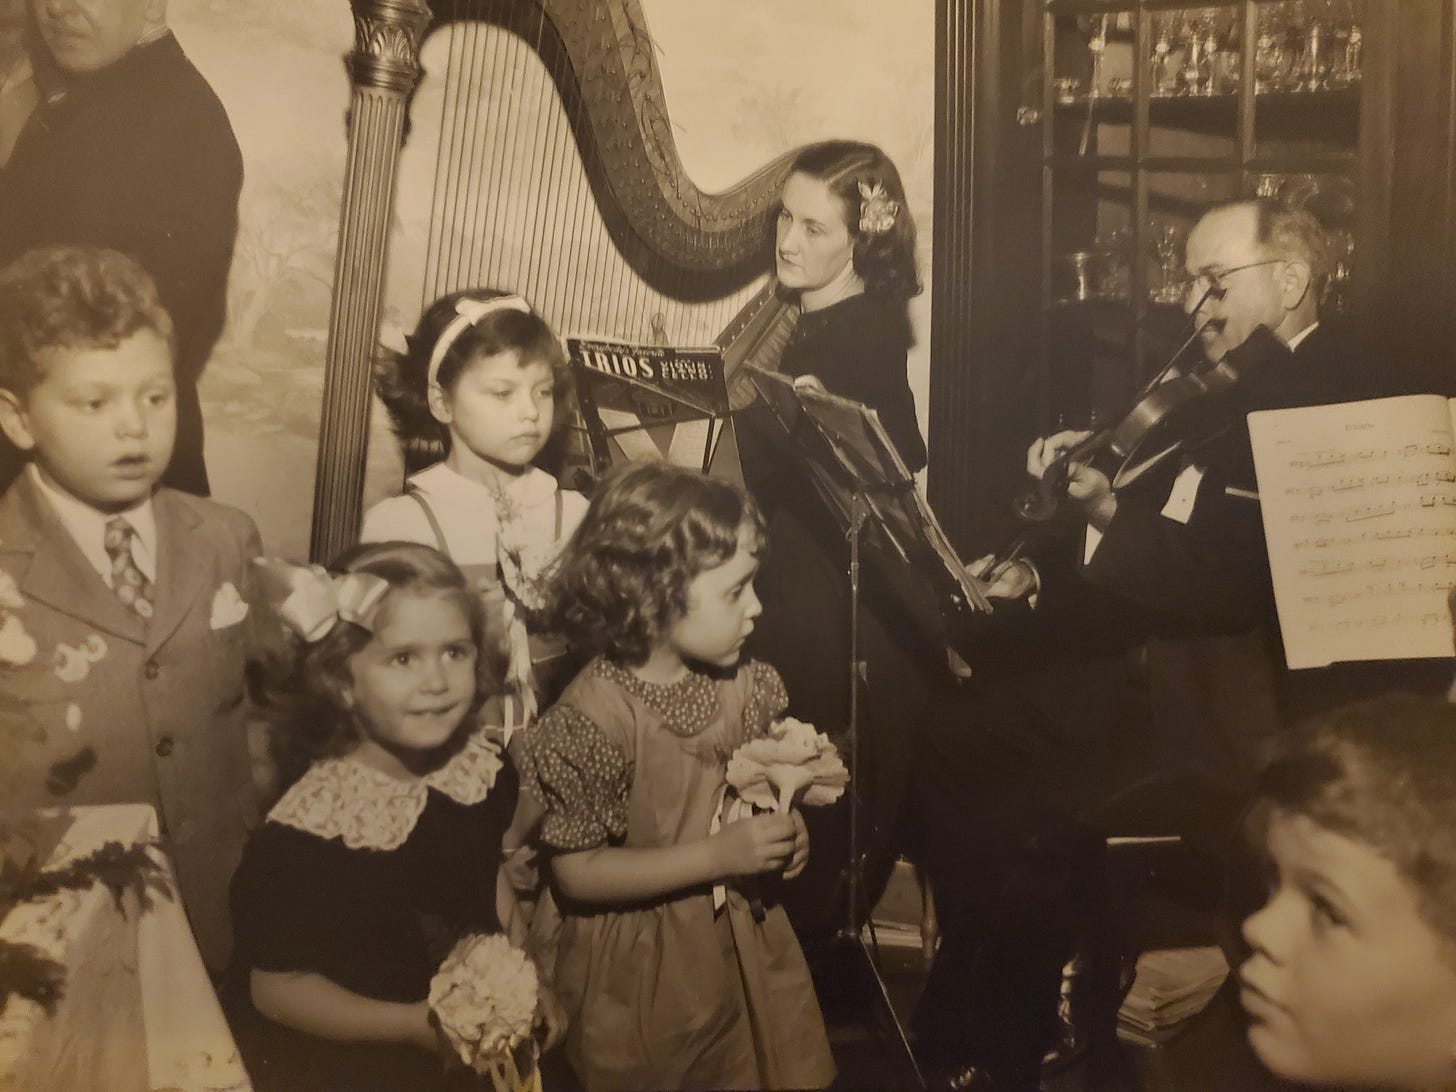 A sepia toned photograph of five small children in dress clothes in front of a harp player and violinist. 